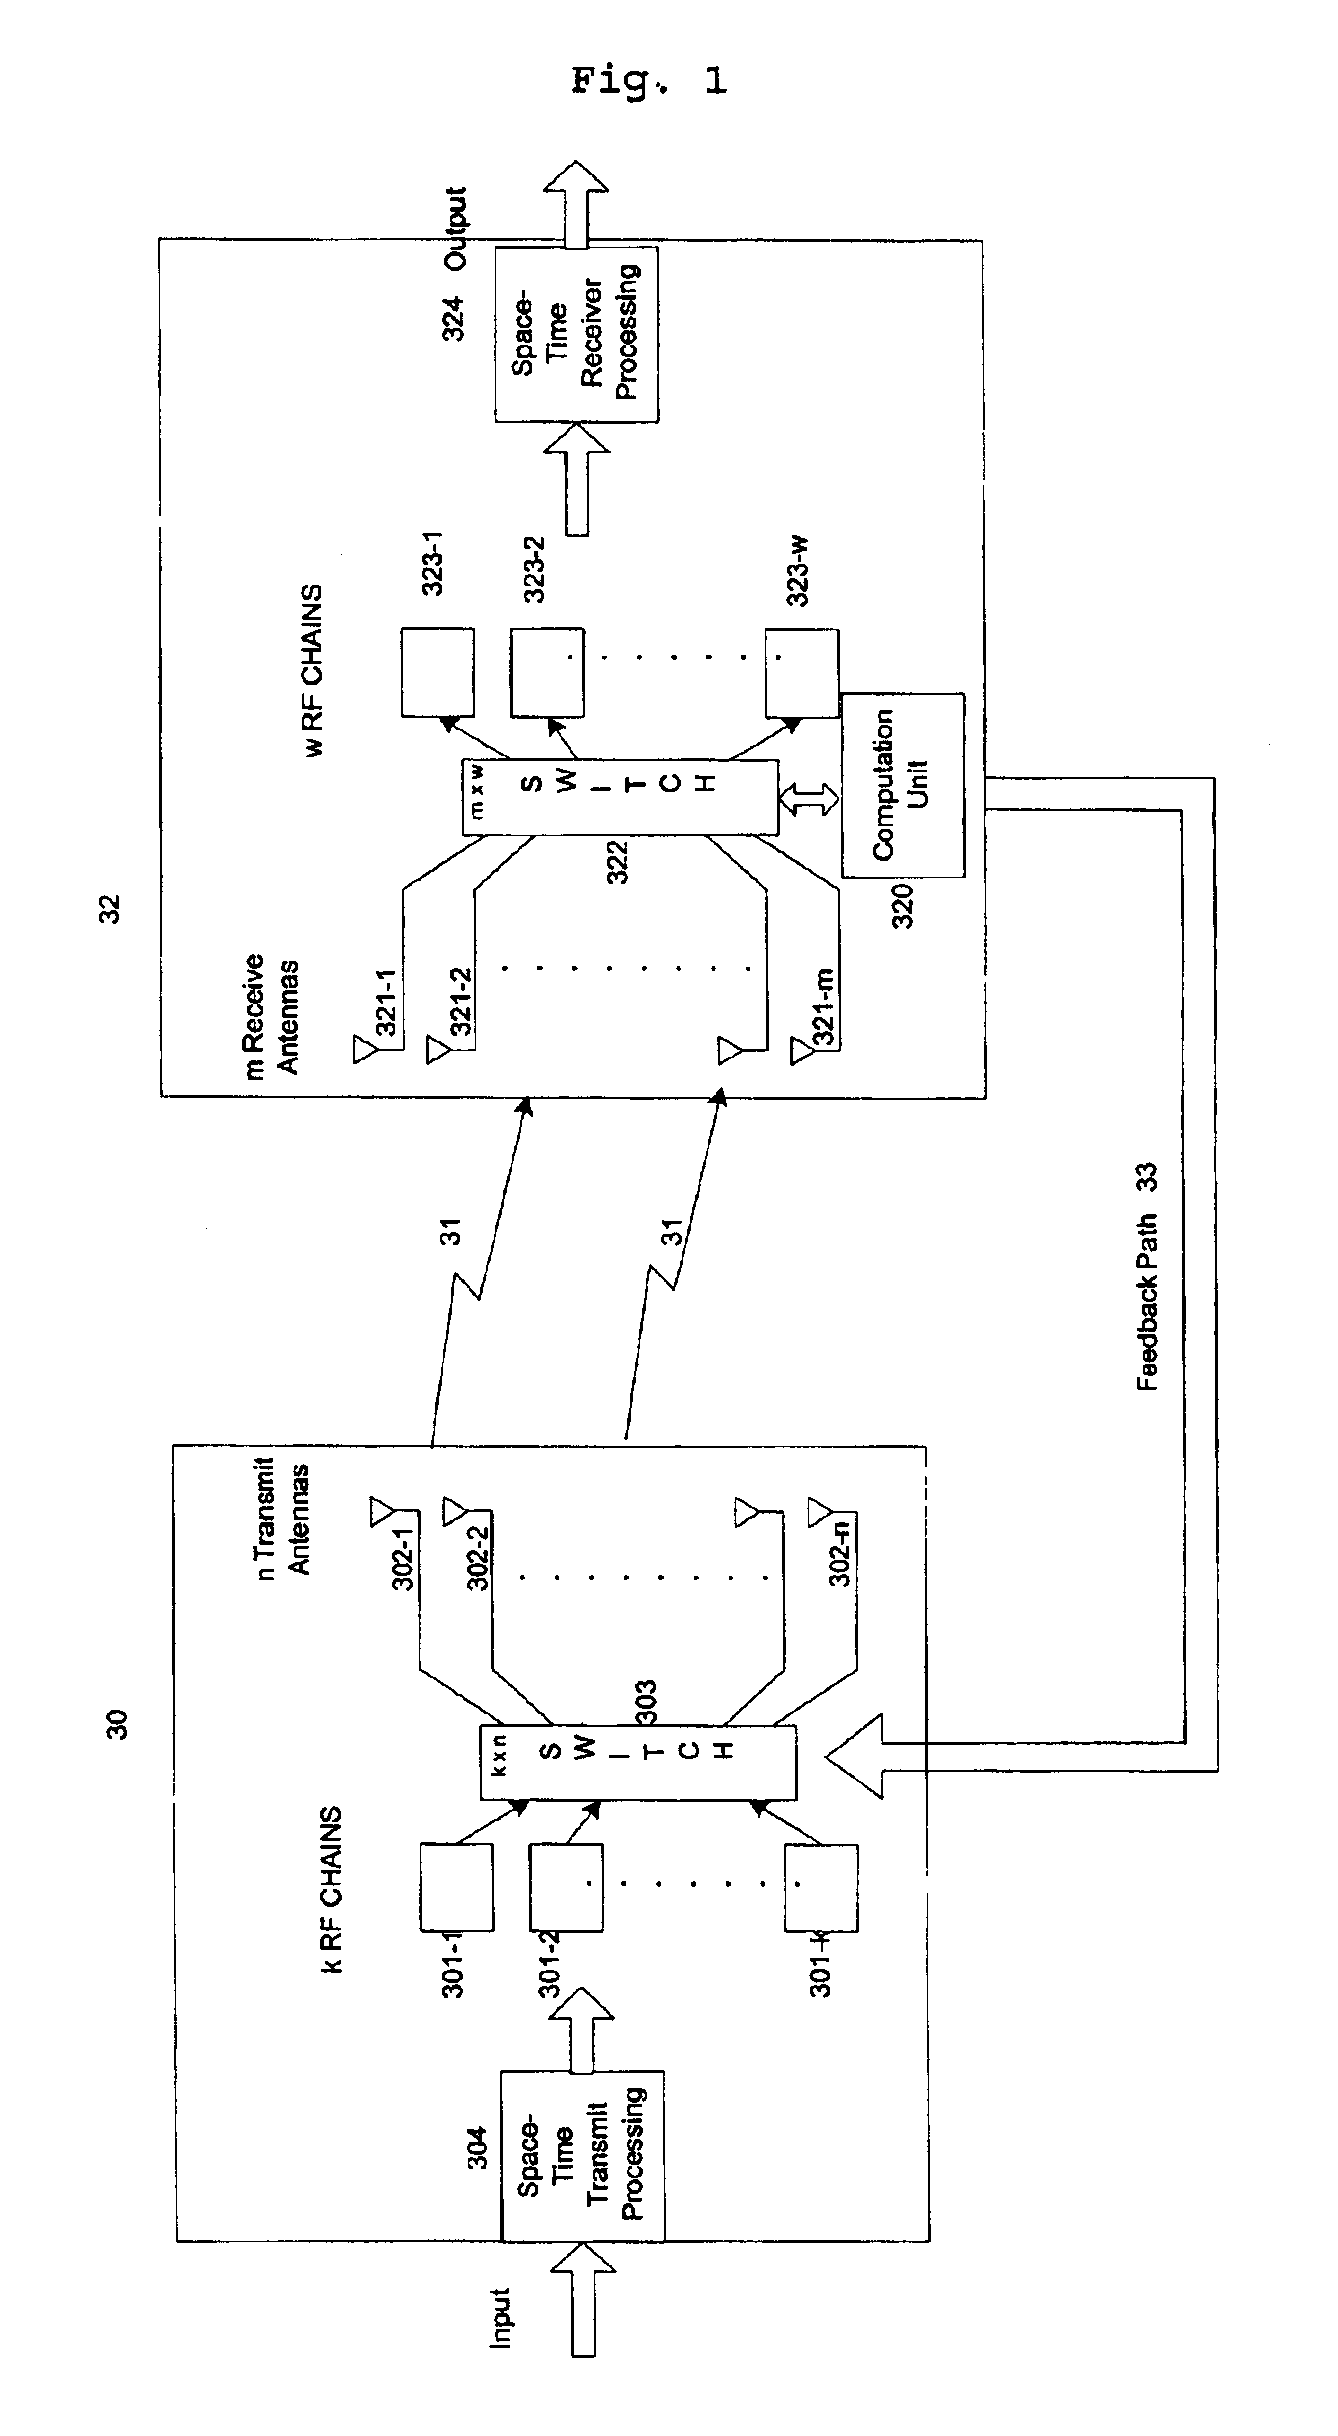 Method and apparatus for selection and use of optimal antennas in wireless systems